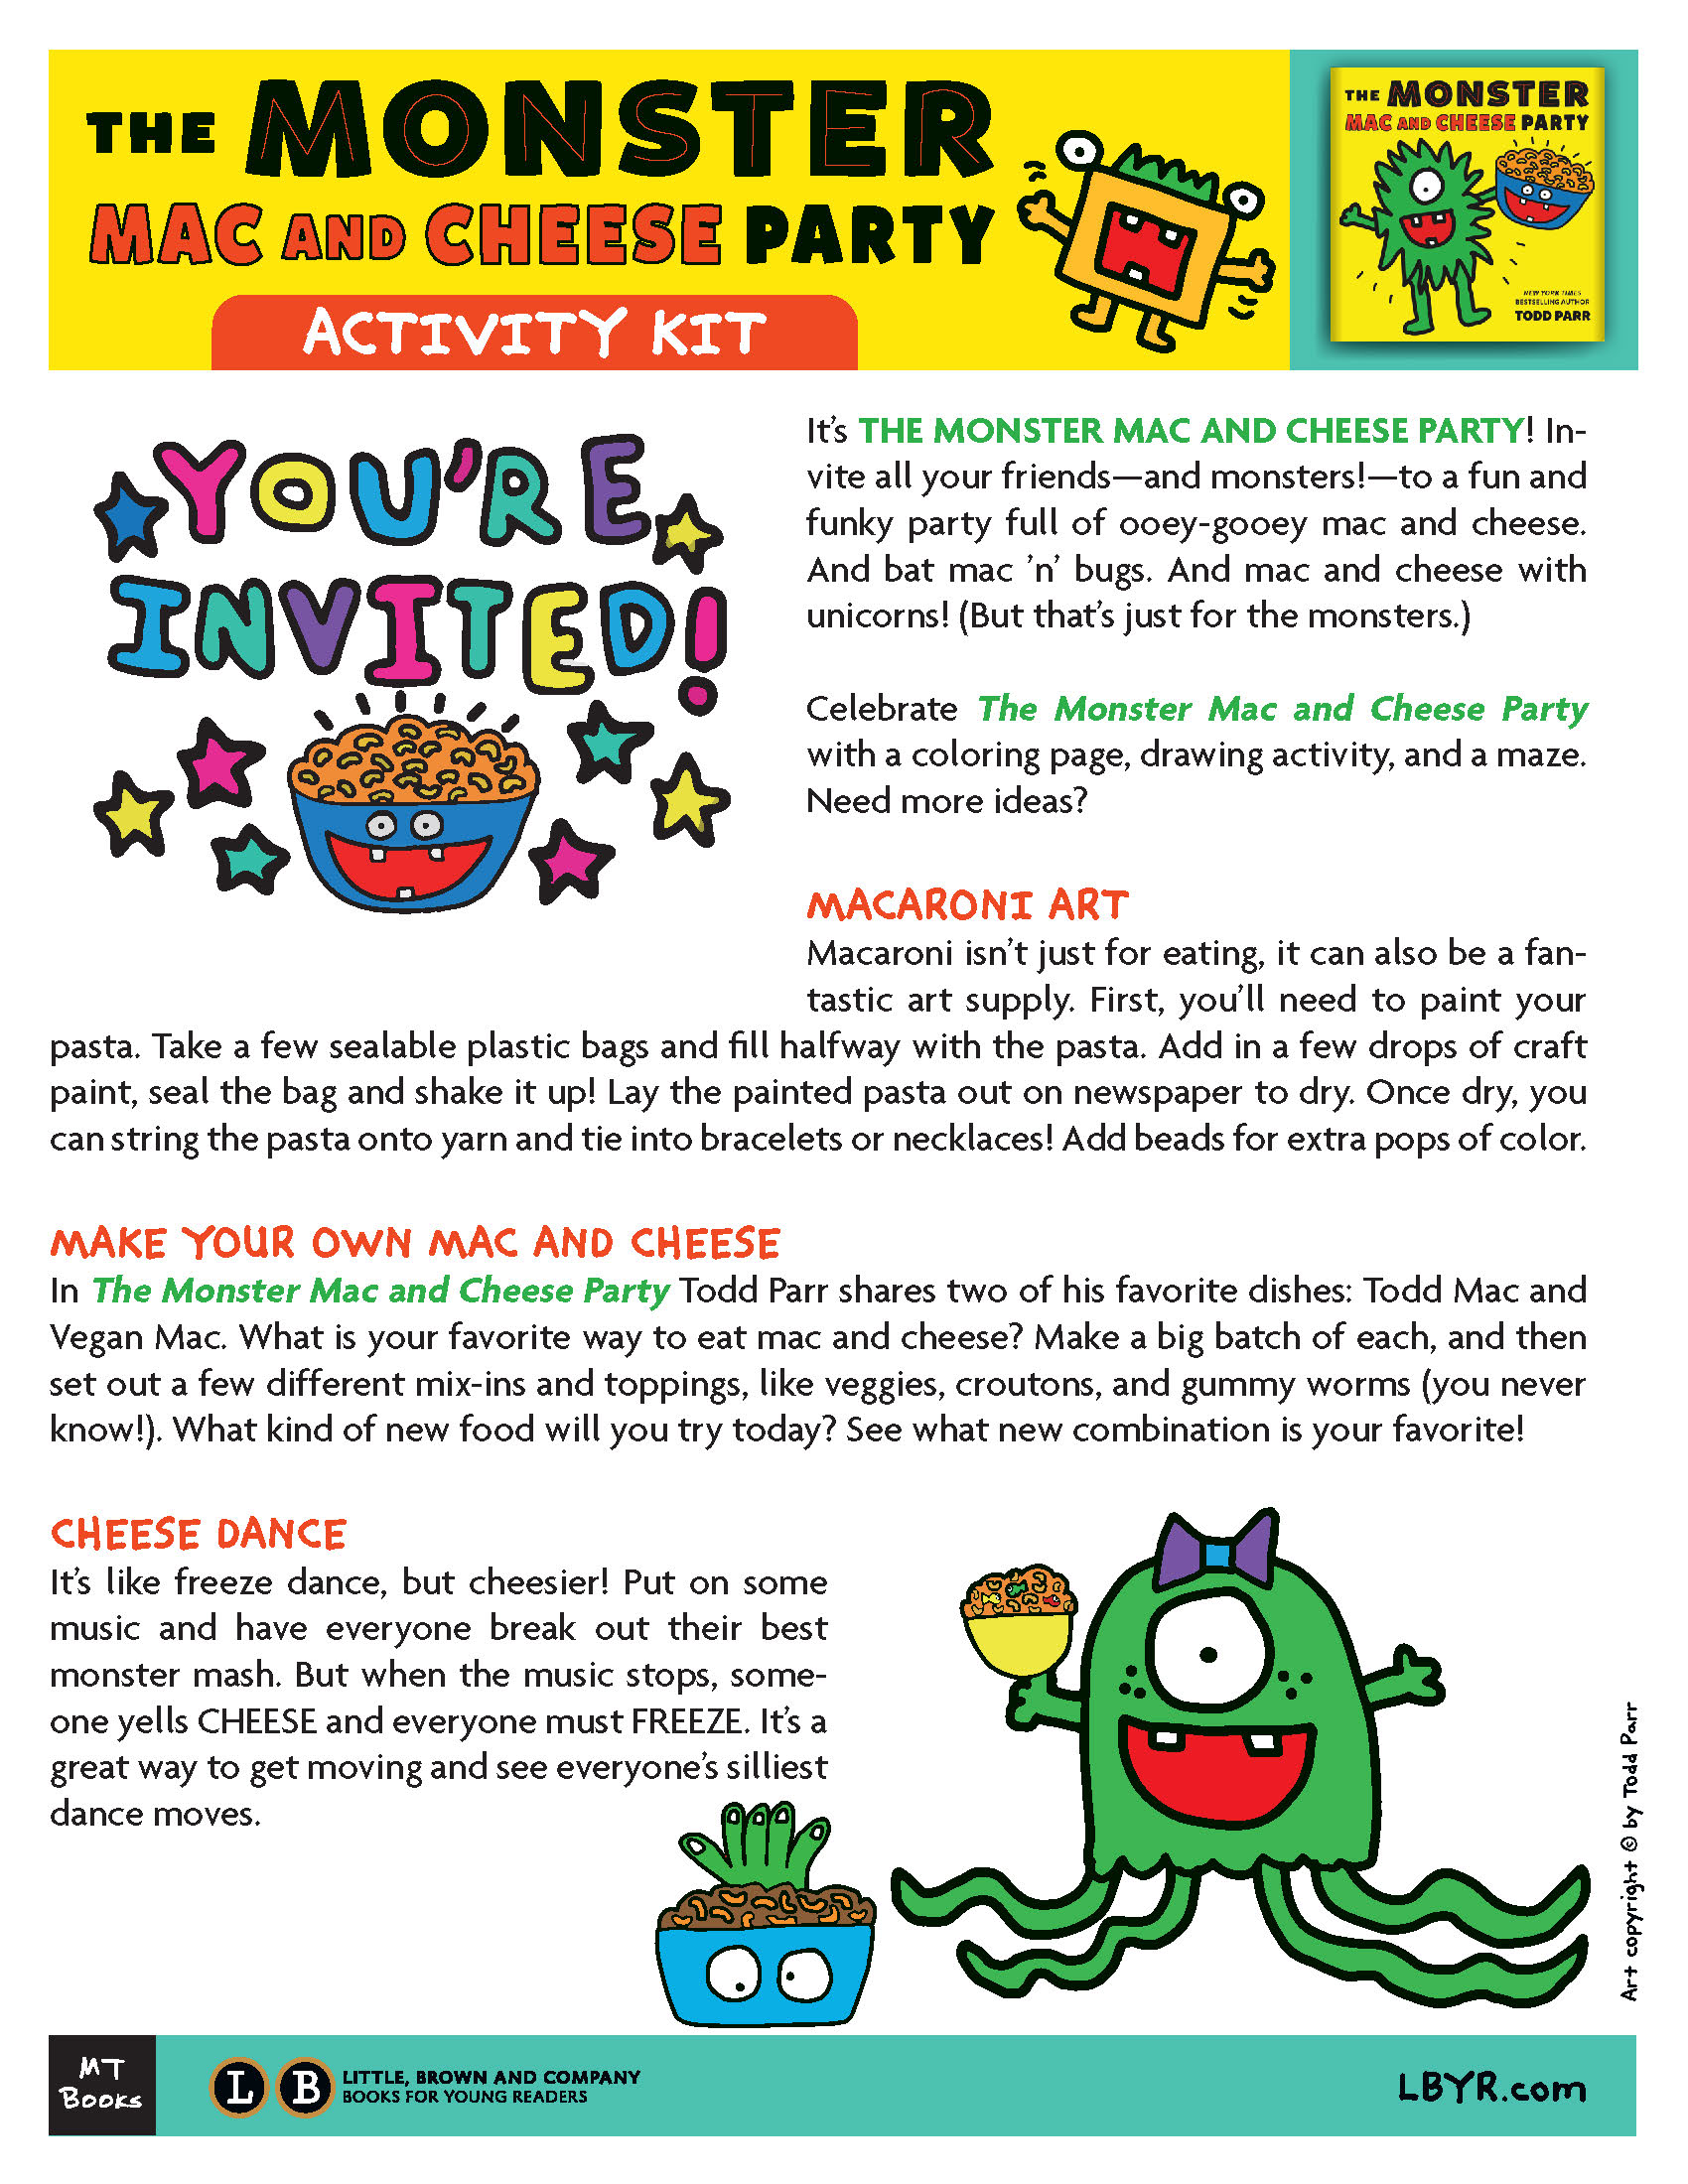 LBYR - First page of 'Monster Mac and Cheese Party' book club guide by Todd Parr 